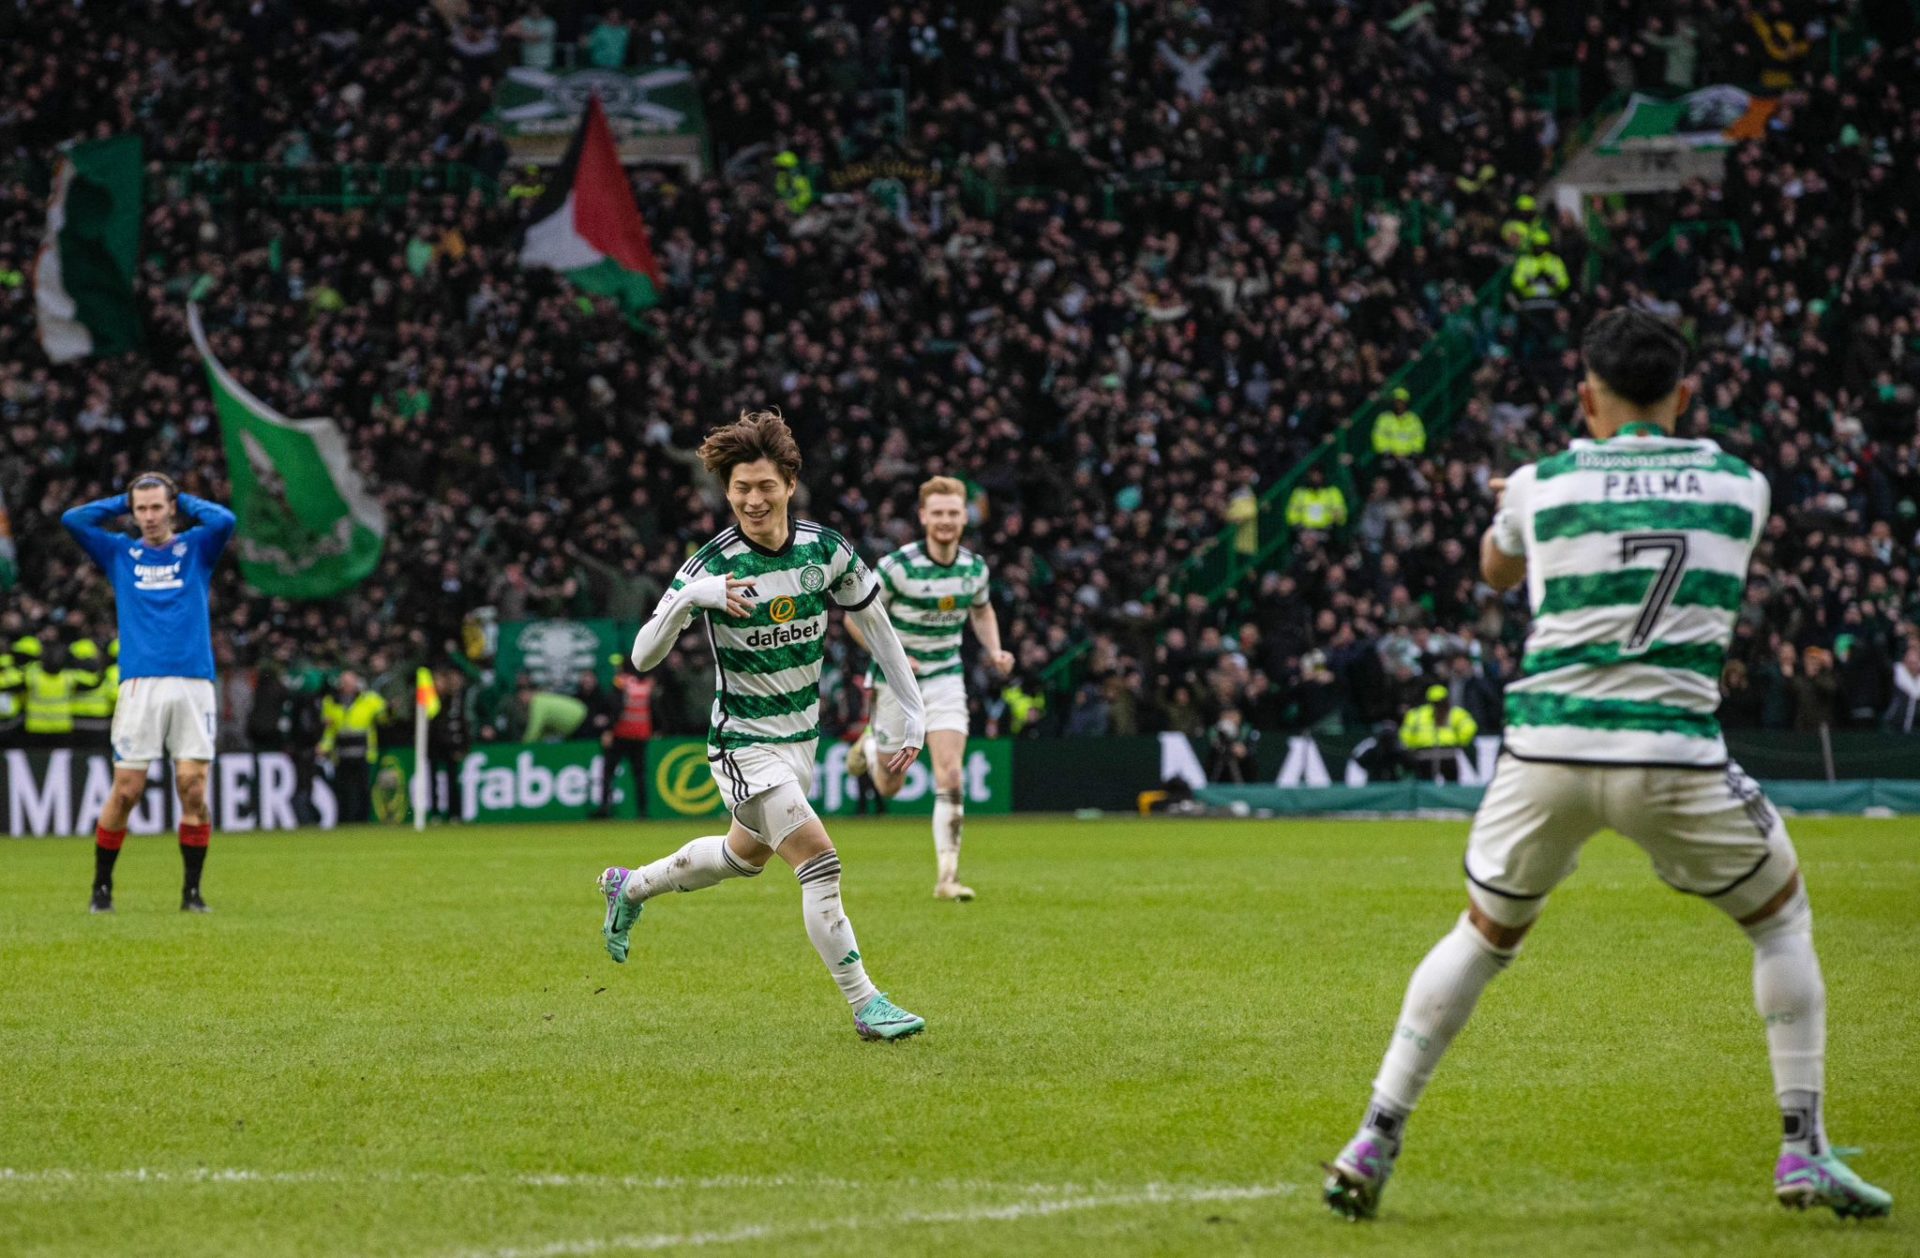 Celtic flex domestic muscle with dominant win over Rangers